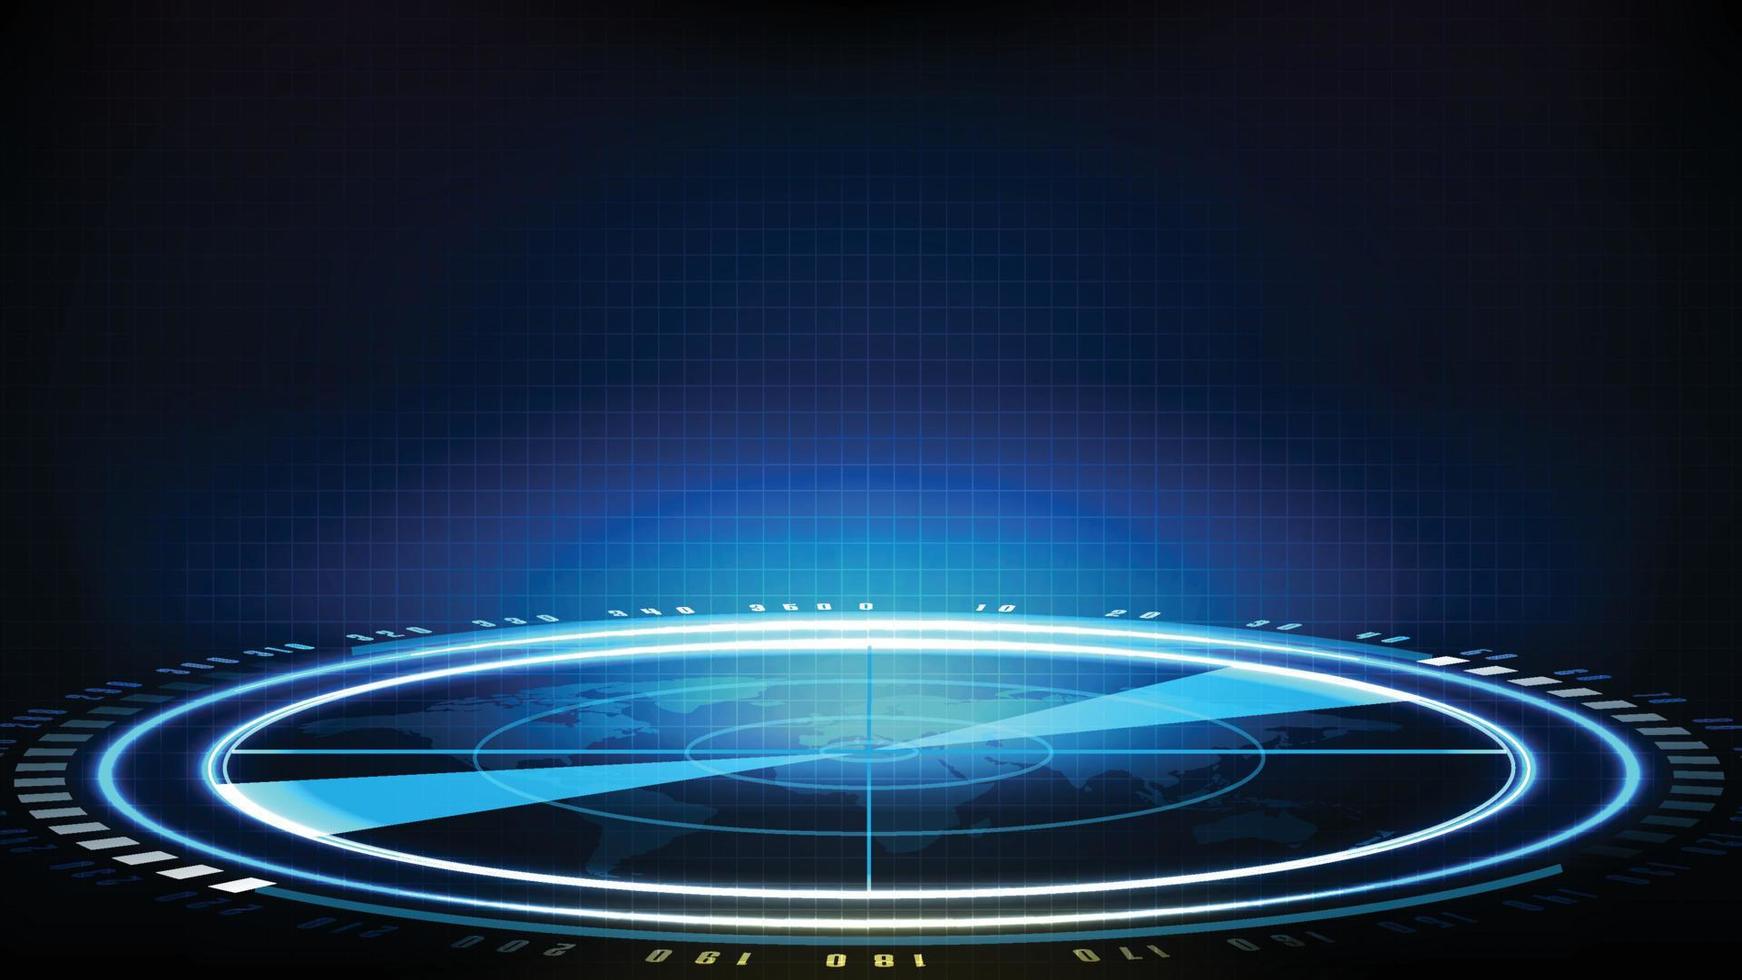 abstract background of futuristic technology screen scan radar interface hud vector